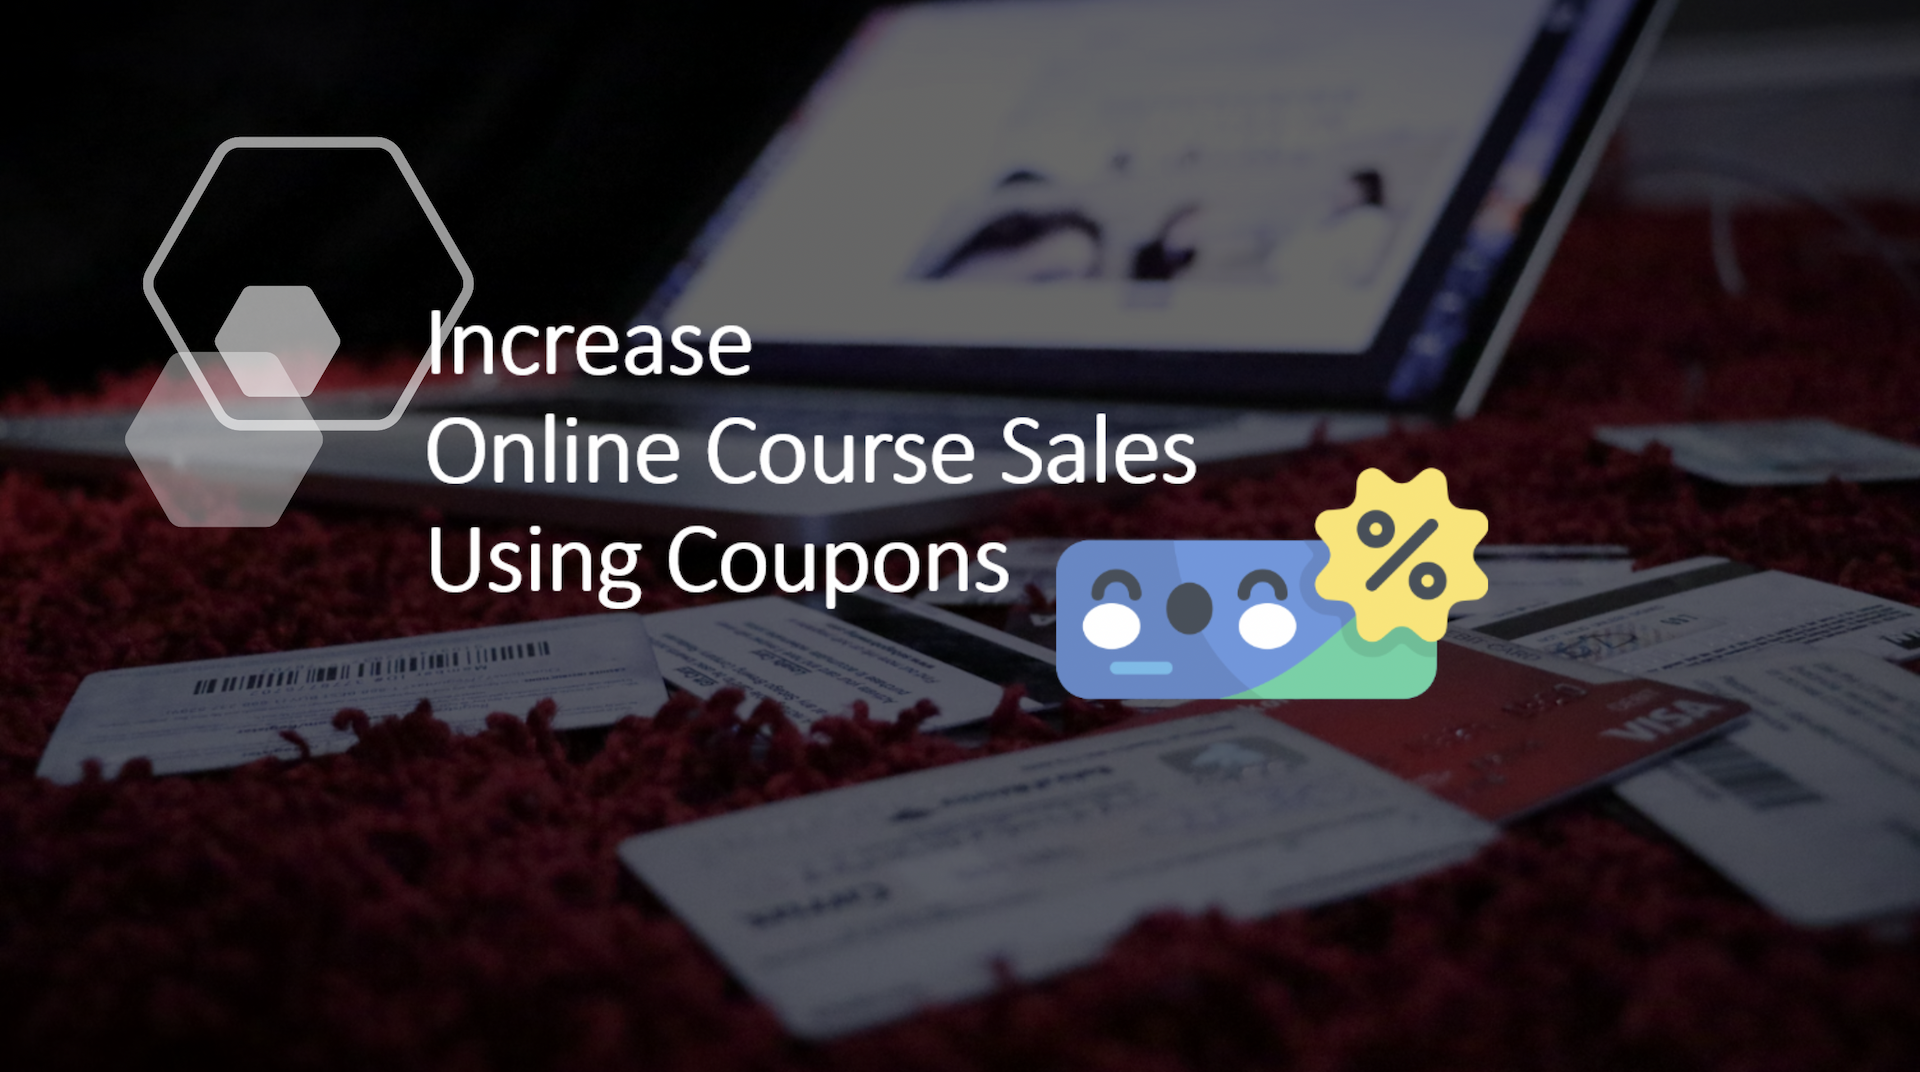 Increase Online Course Sales Using Coupons